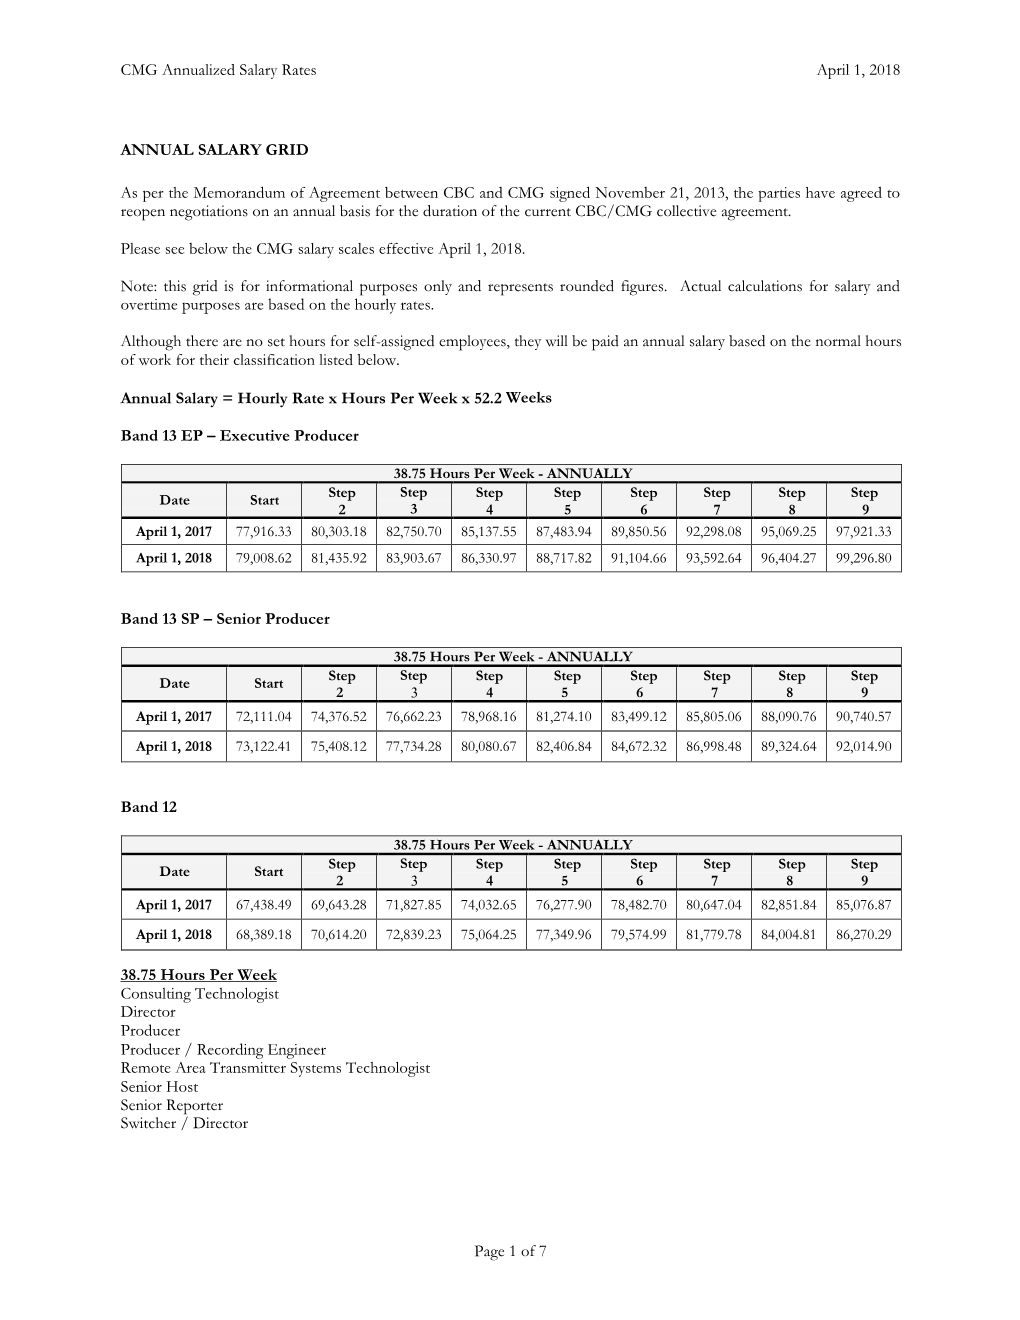 CMG Annualized Salary Rates April 1, 2018 Page 1 of 7 ANNUAL